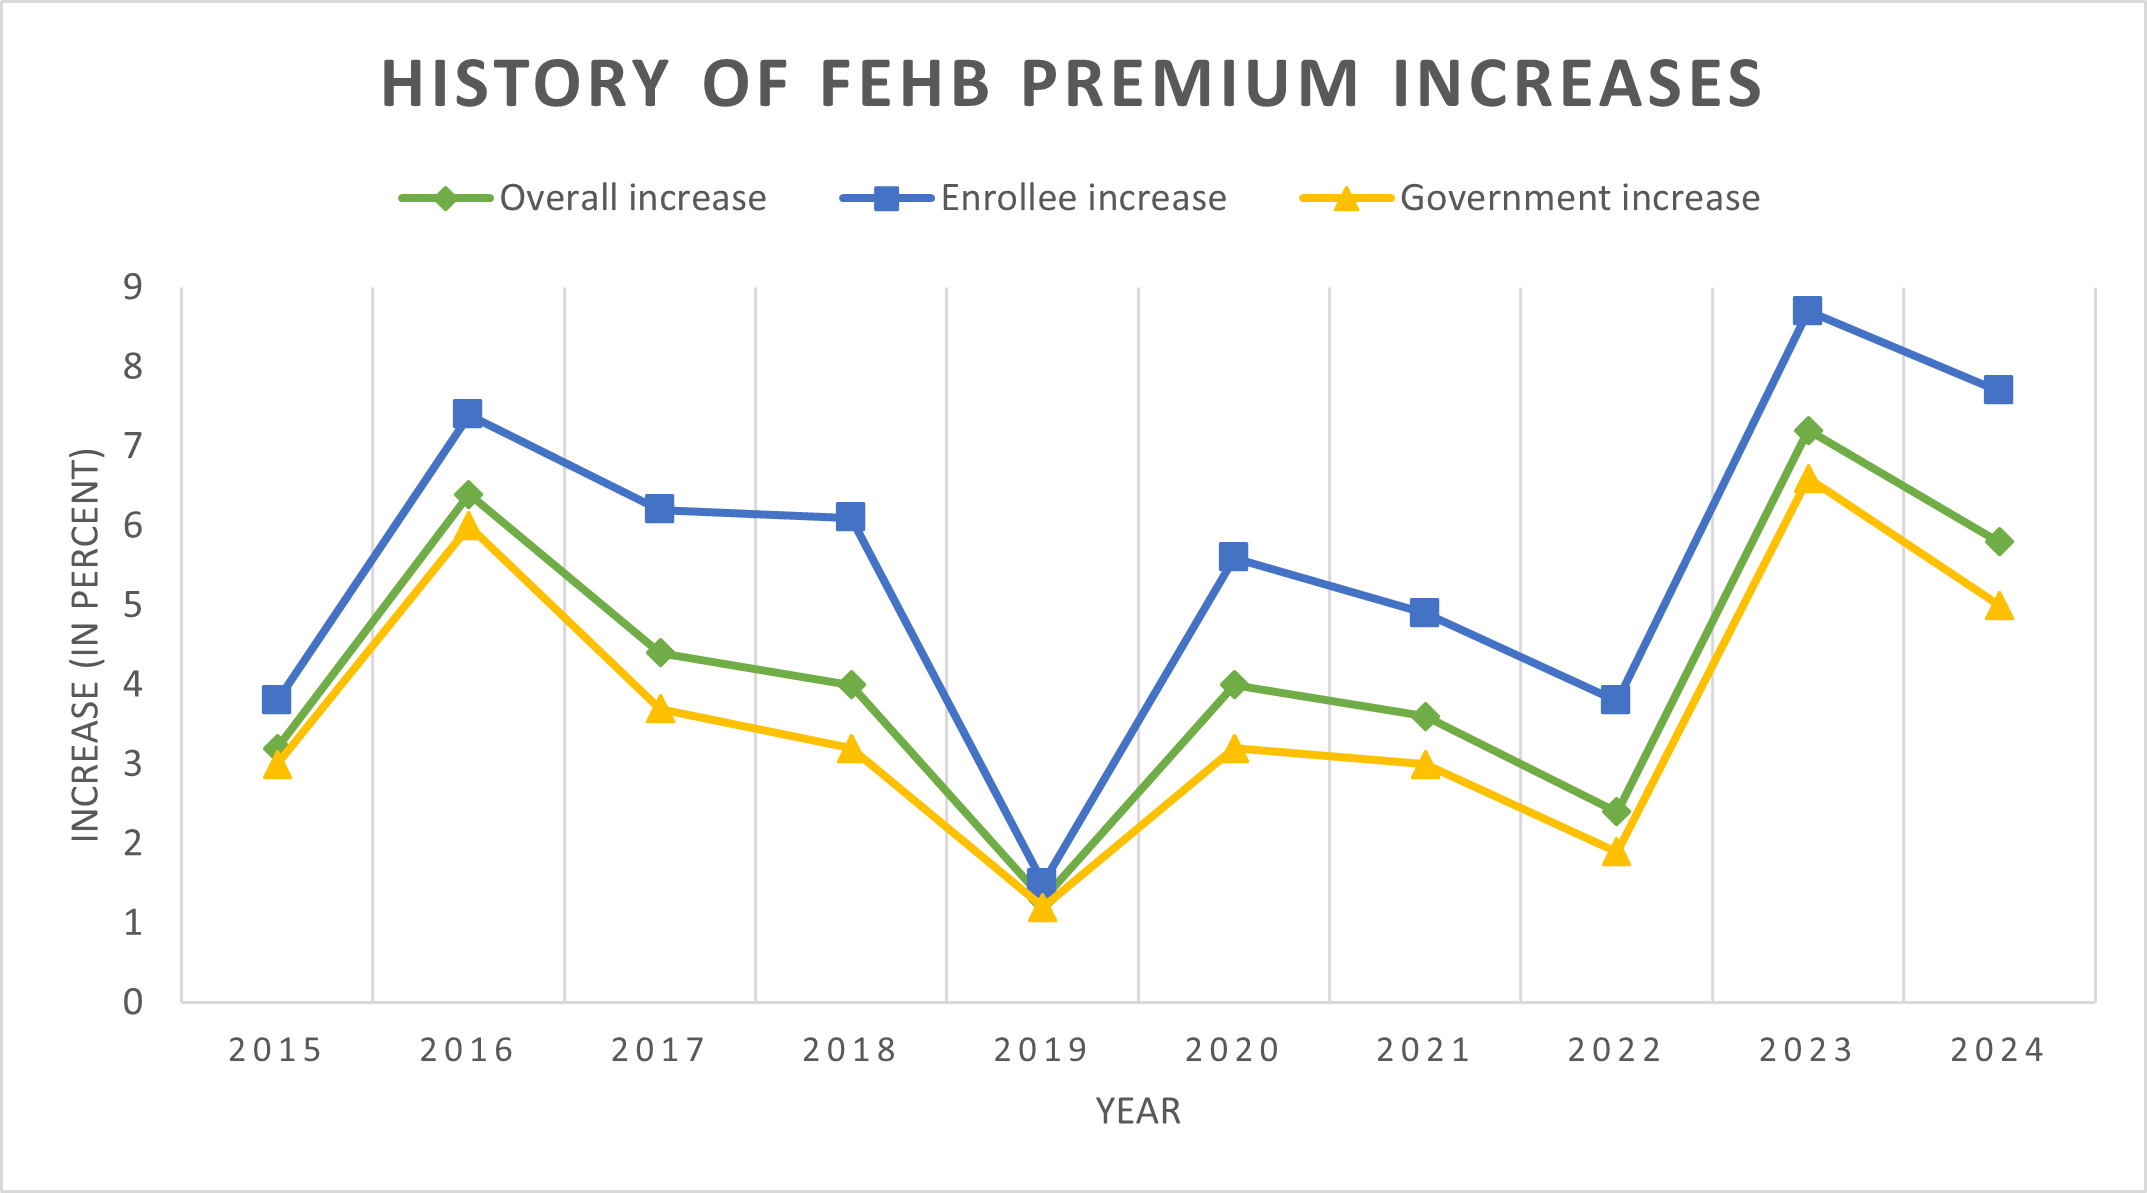 Graph depicting history of FEHB premium increases from 2015-present.